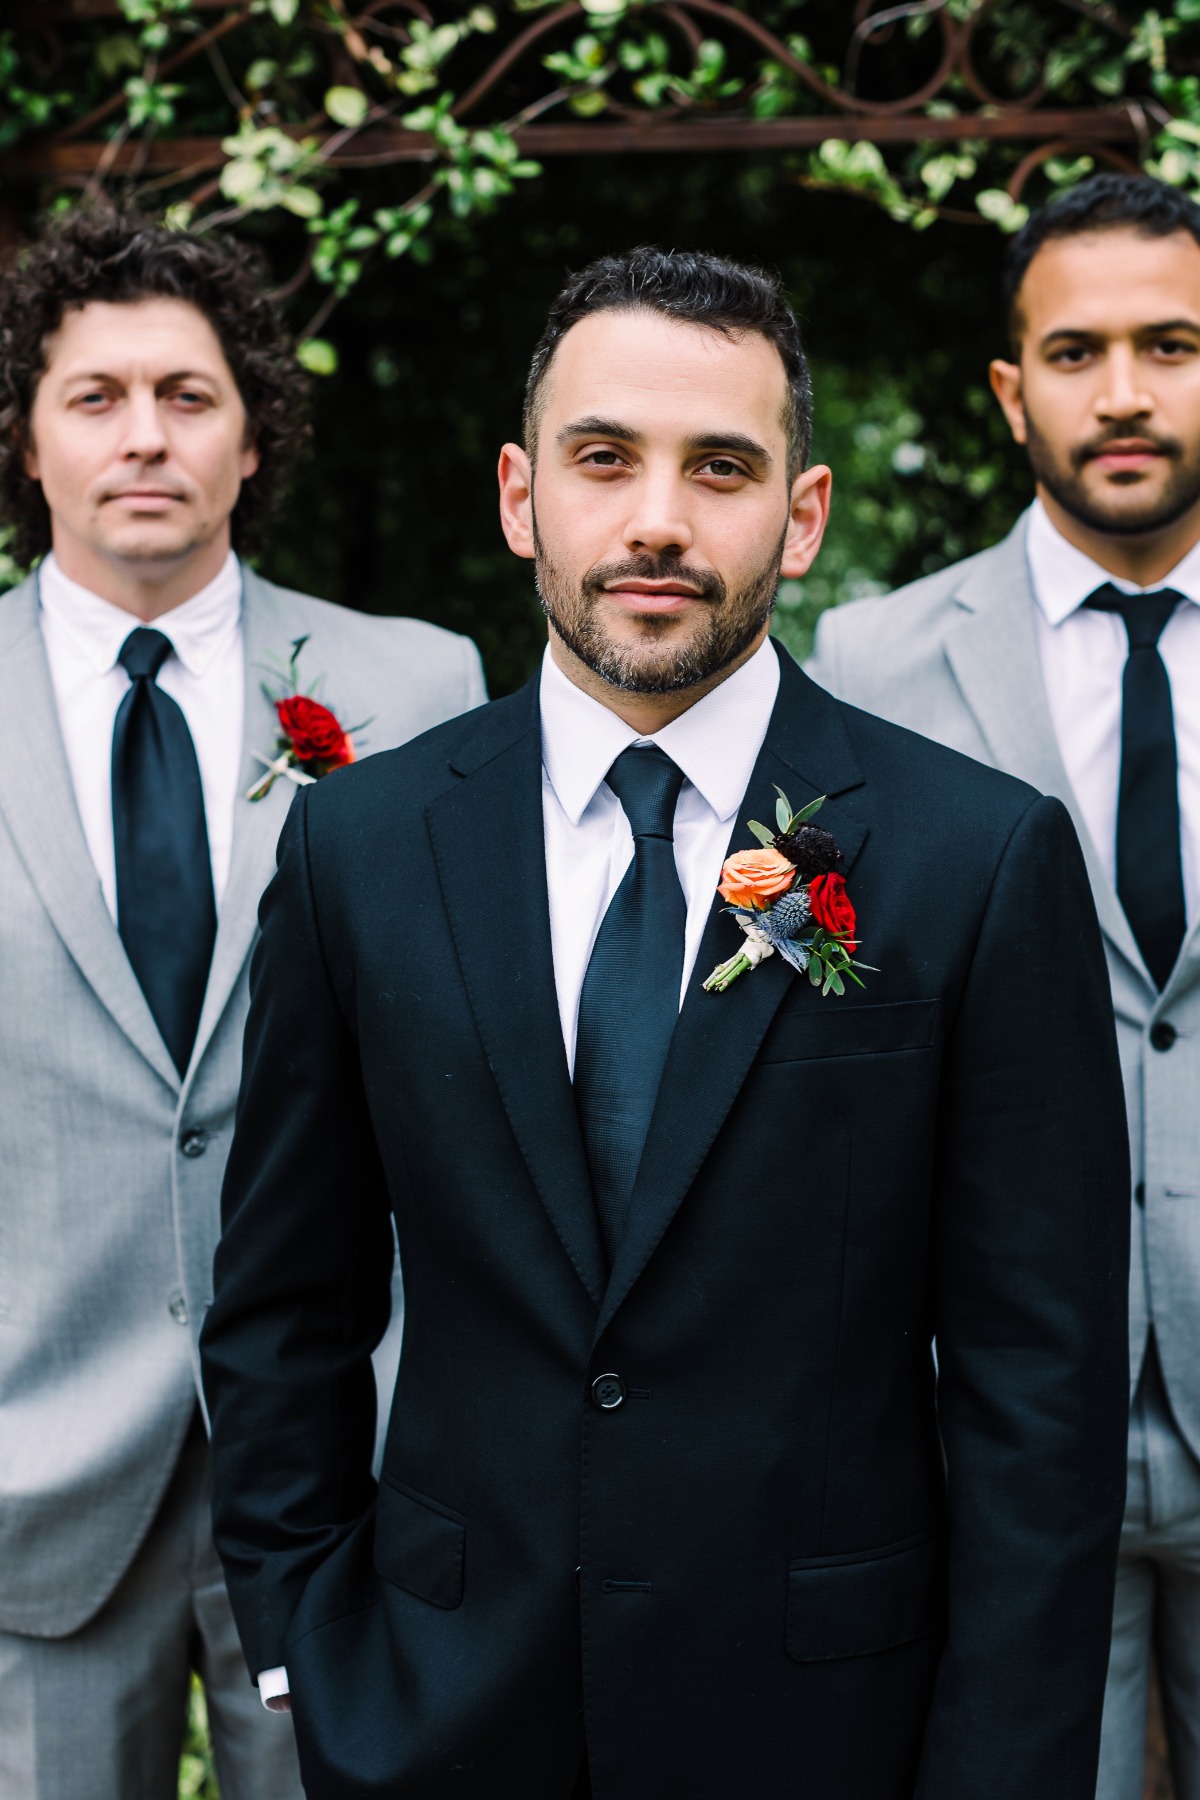 Gray groomsmen suits with classic groom